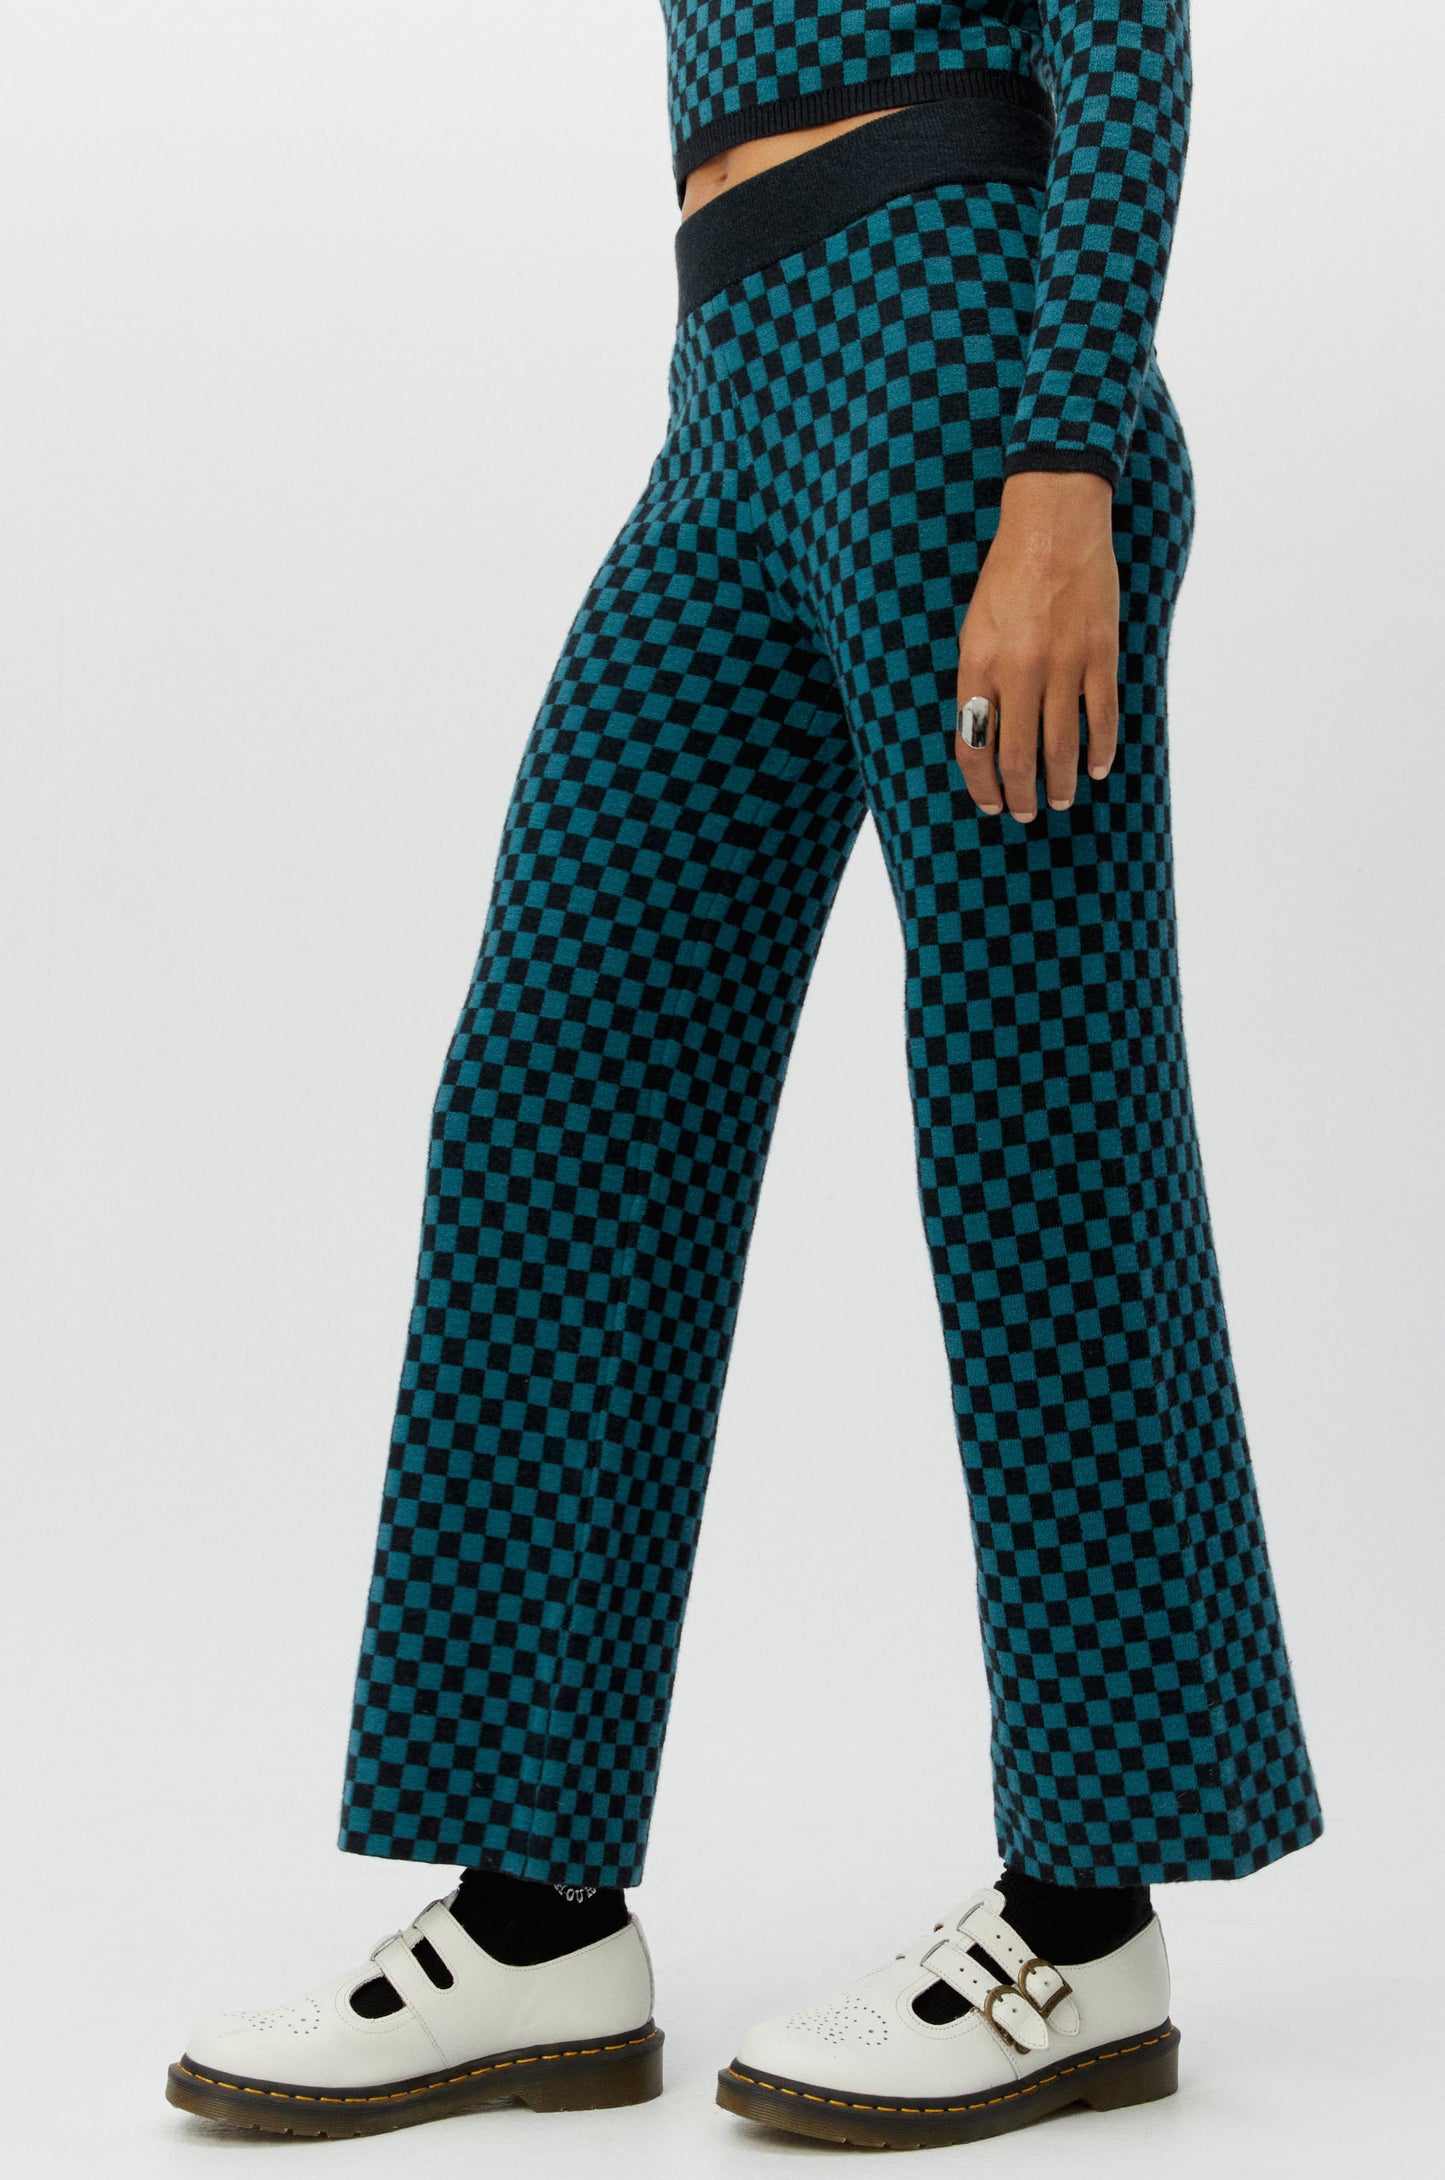 teal checkered pant legs